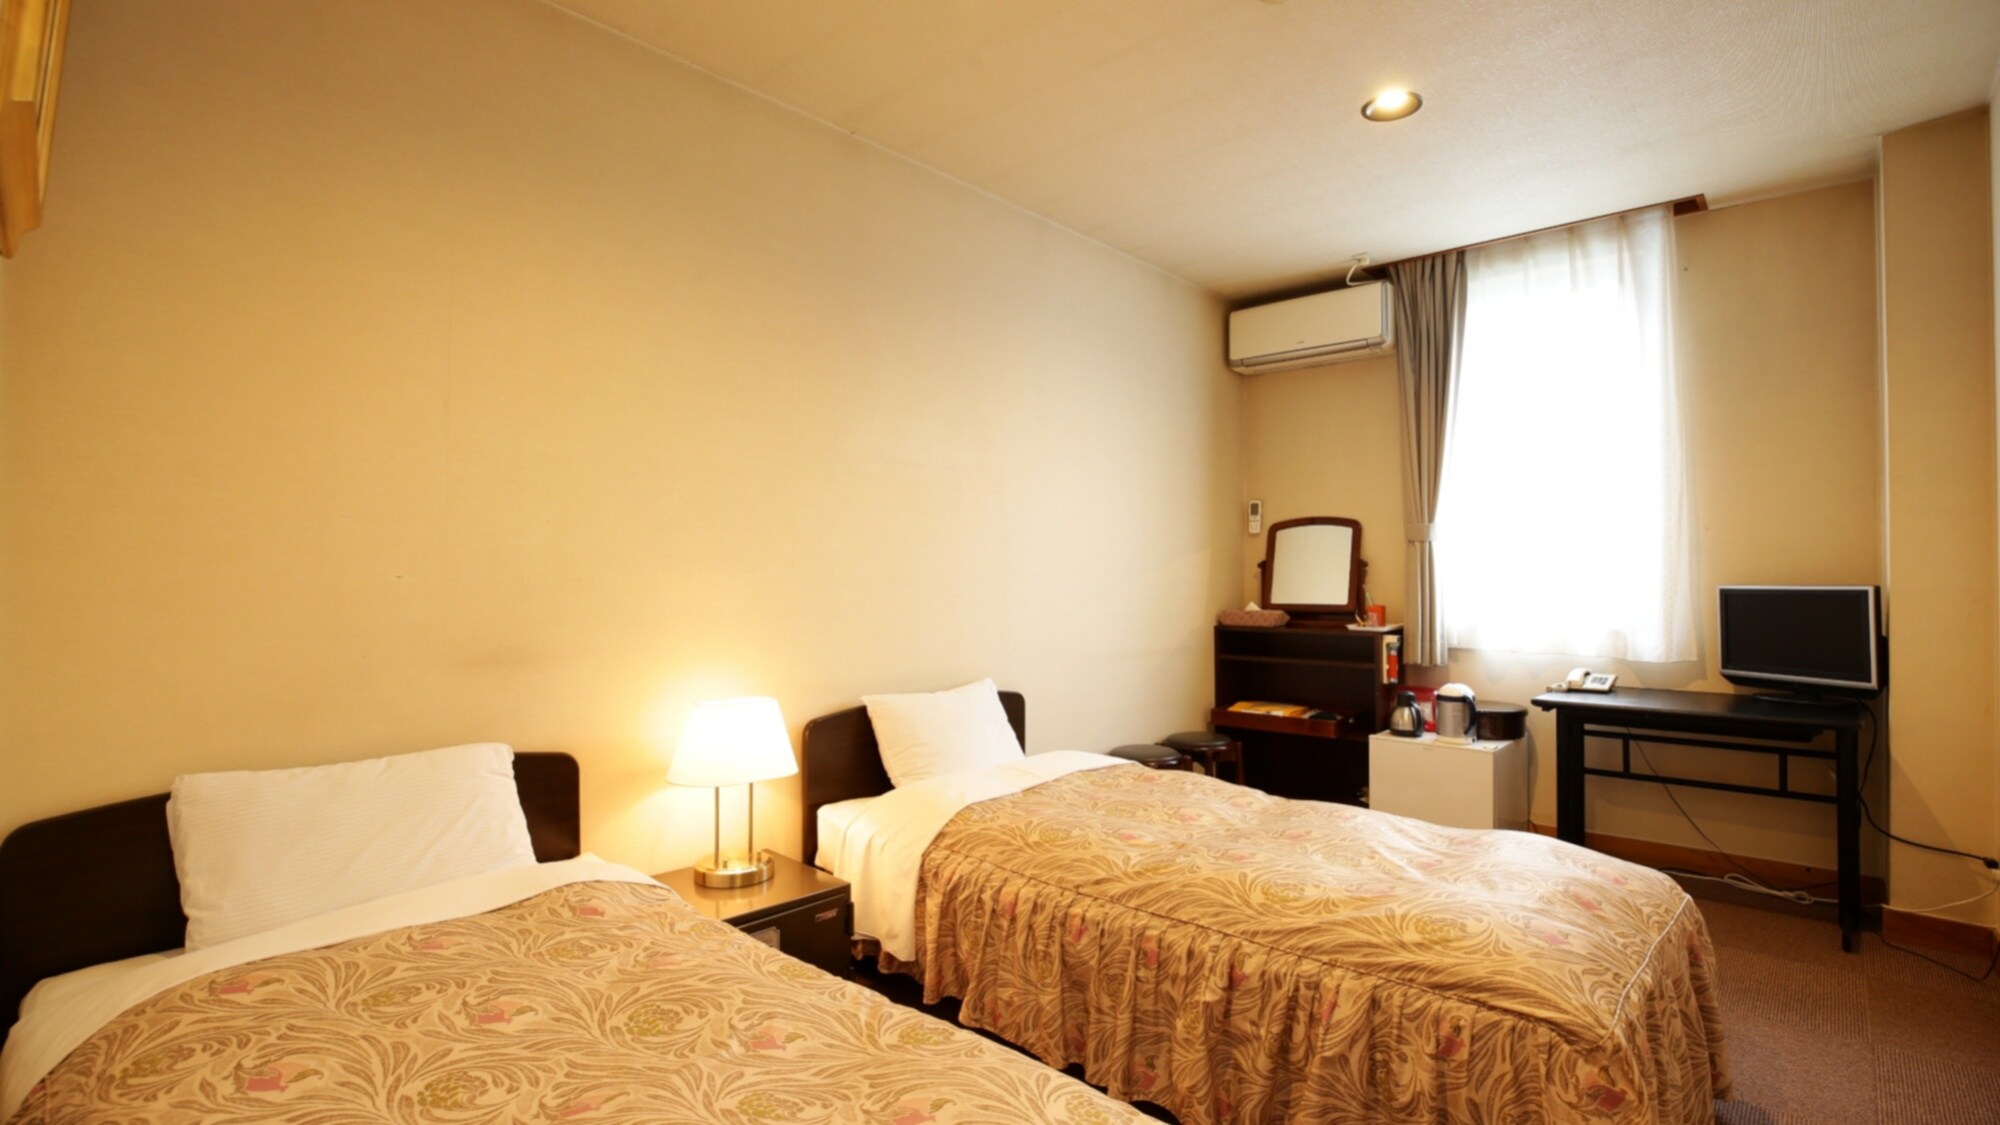 Special Japanese and Western rooms: Room limited to one group per day. Please spend a luxurious time in a spacious space.